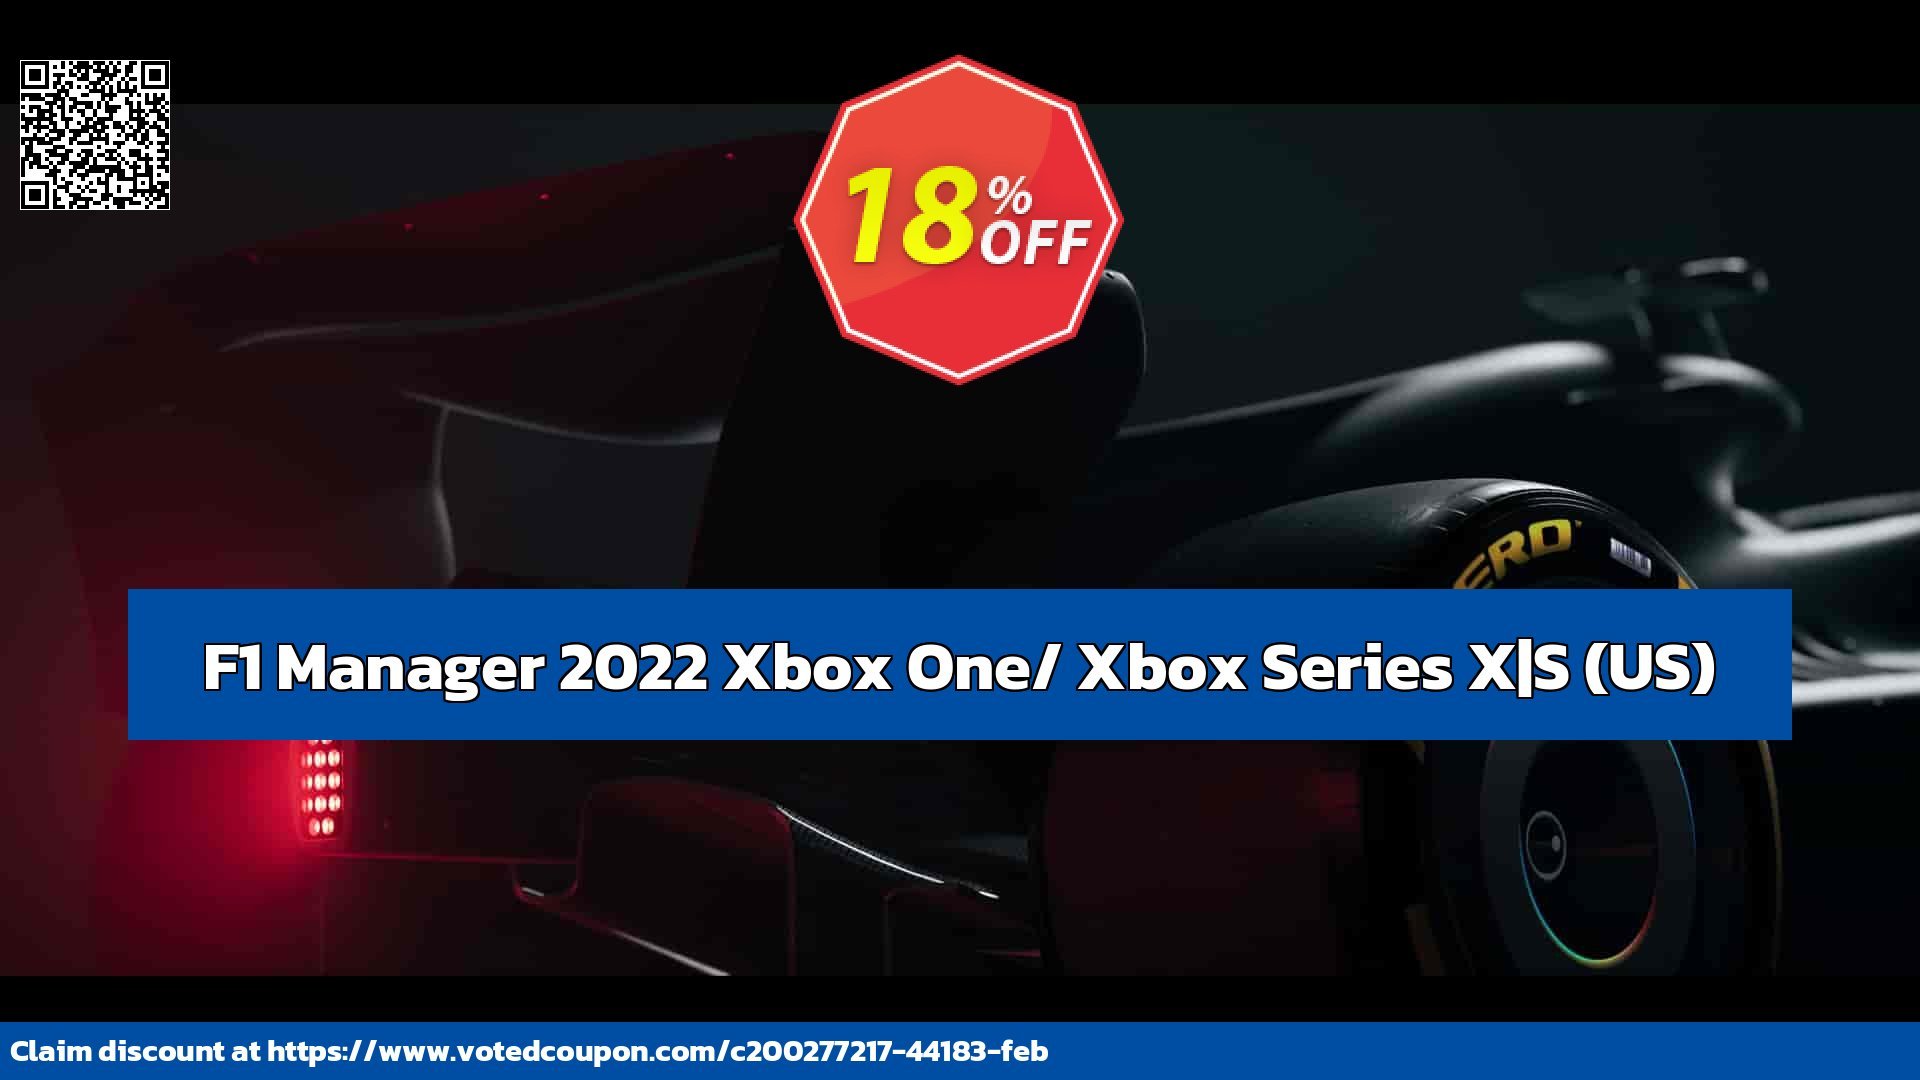 F1 Manager 2022 Xbox One/ Xbox Series X|S, US  voted-on promotion codes